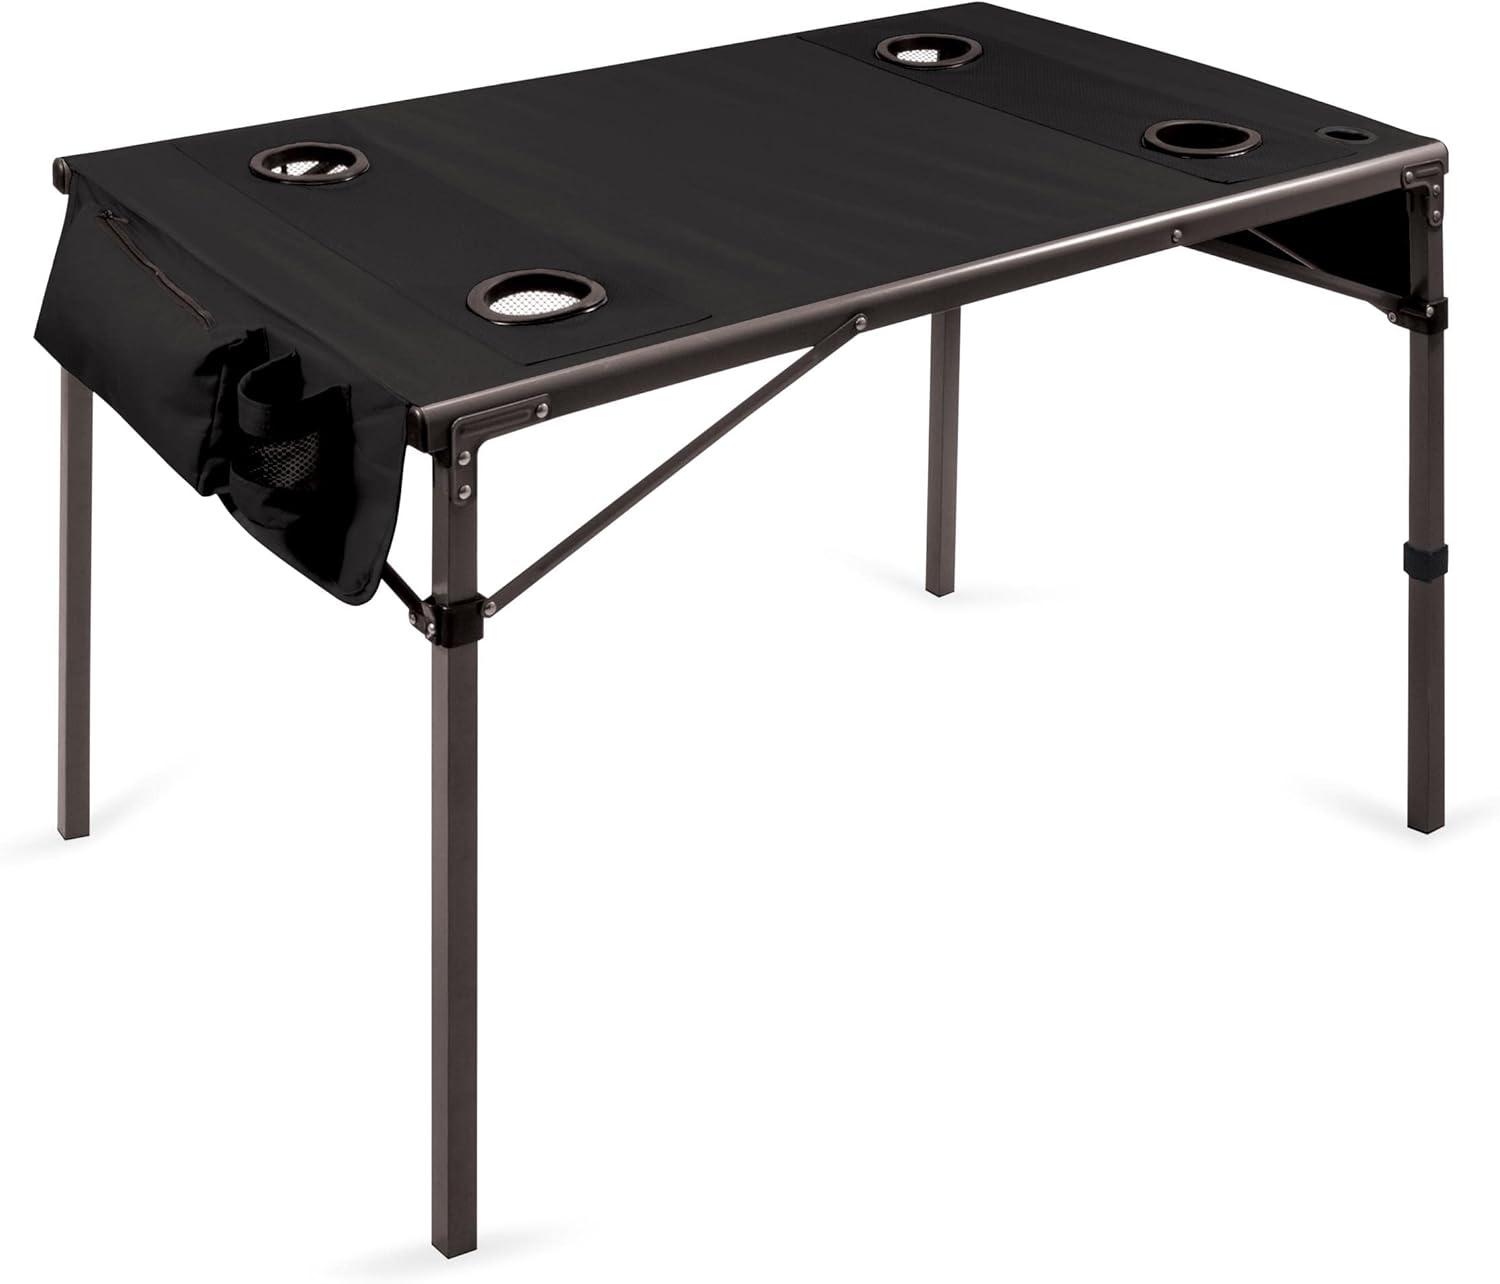 Compact Black Folding Travel Table with Drink Holders and Storage